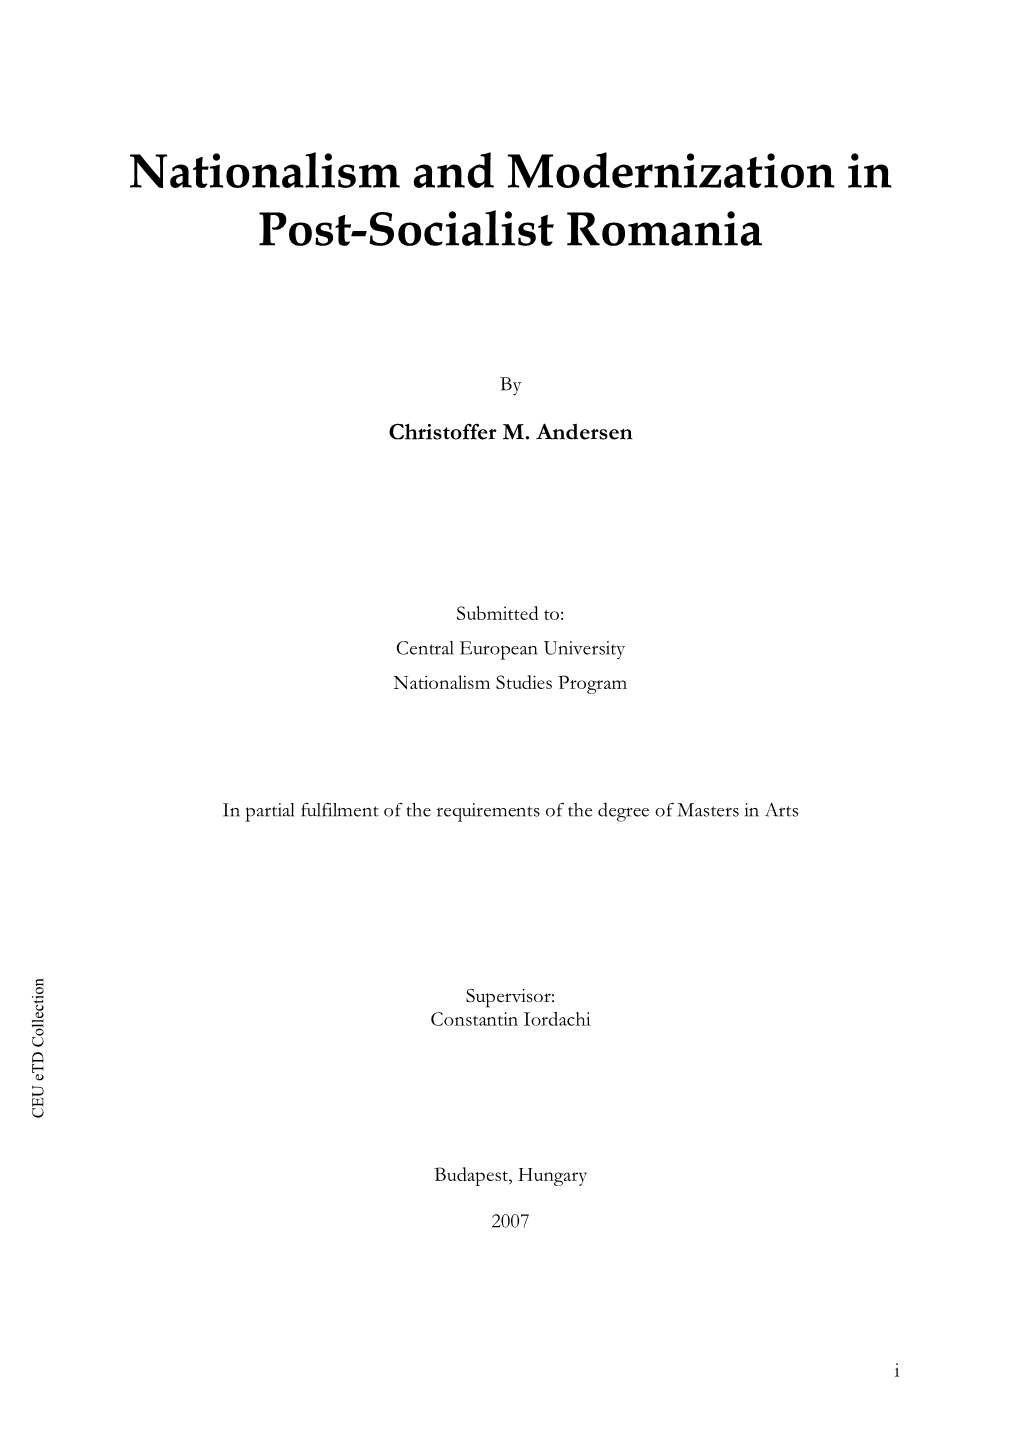 Nationalism and Modernization in Transitional Post-Socialist Romania